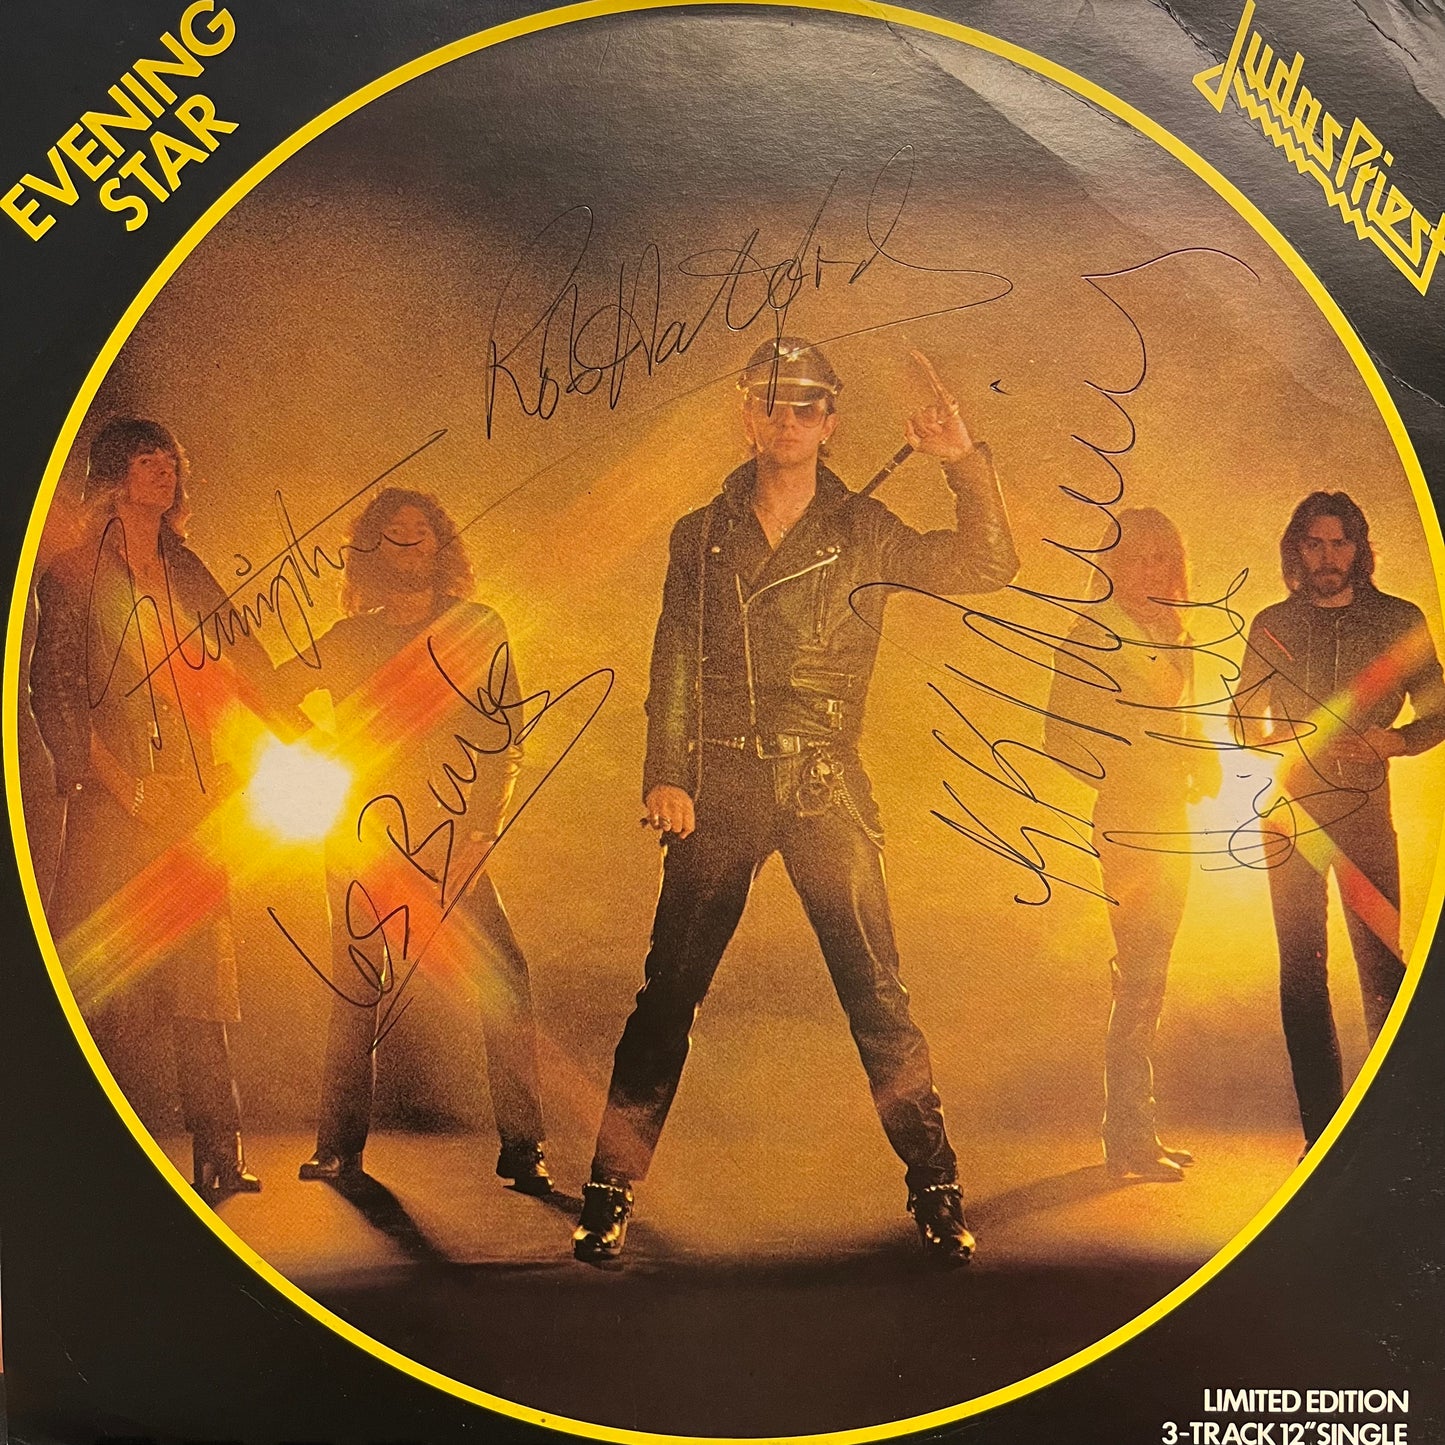 Judas Priest - Evening Star 12" (Signed By Band) (Used LP)